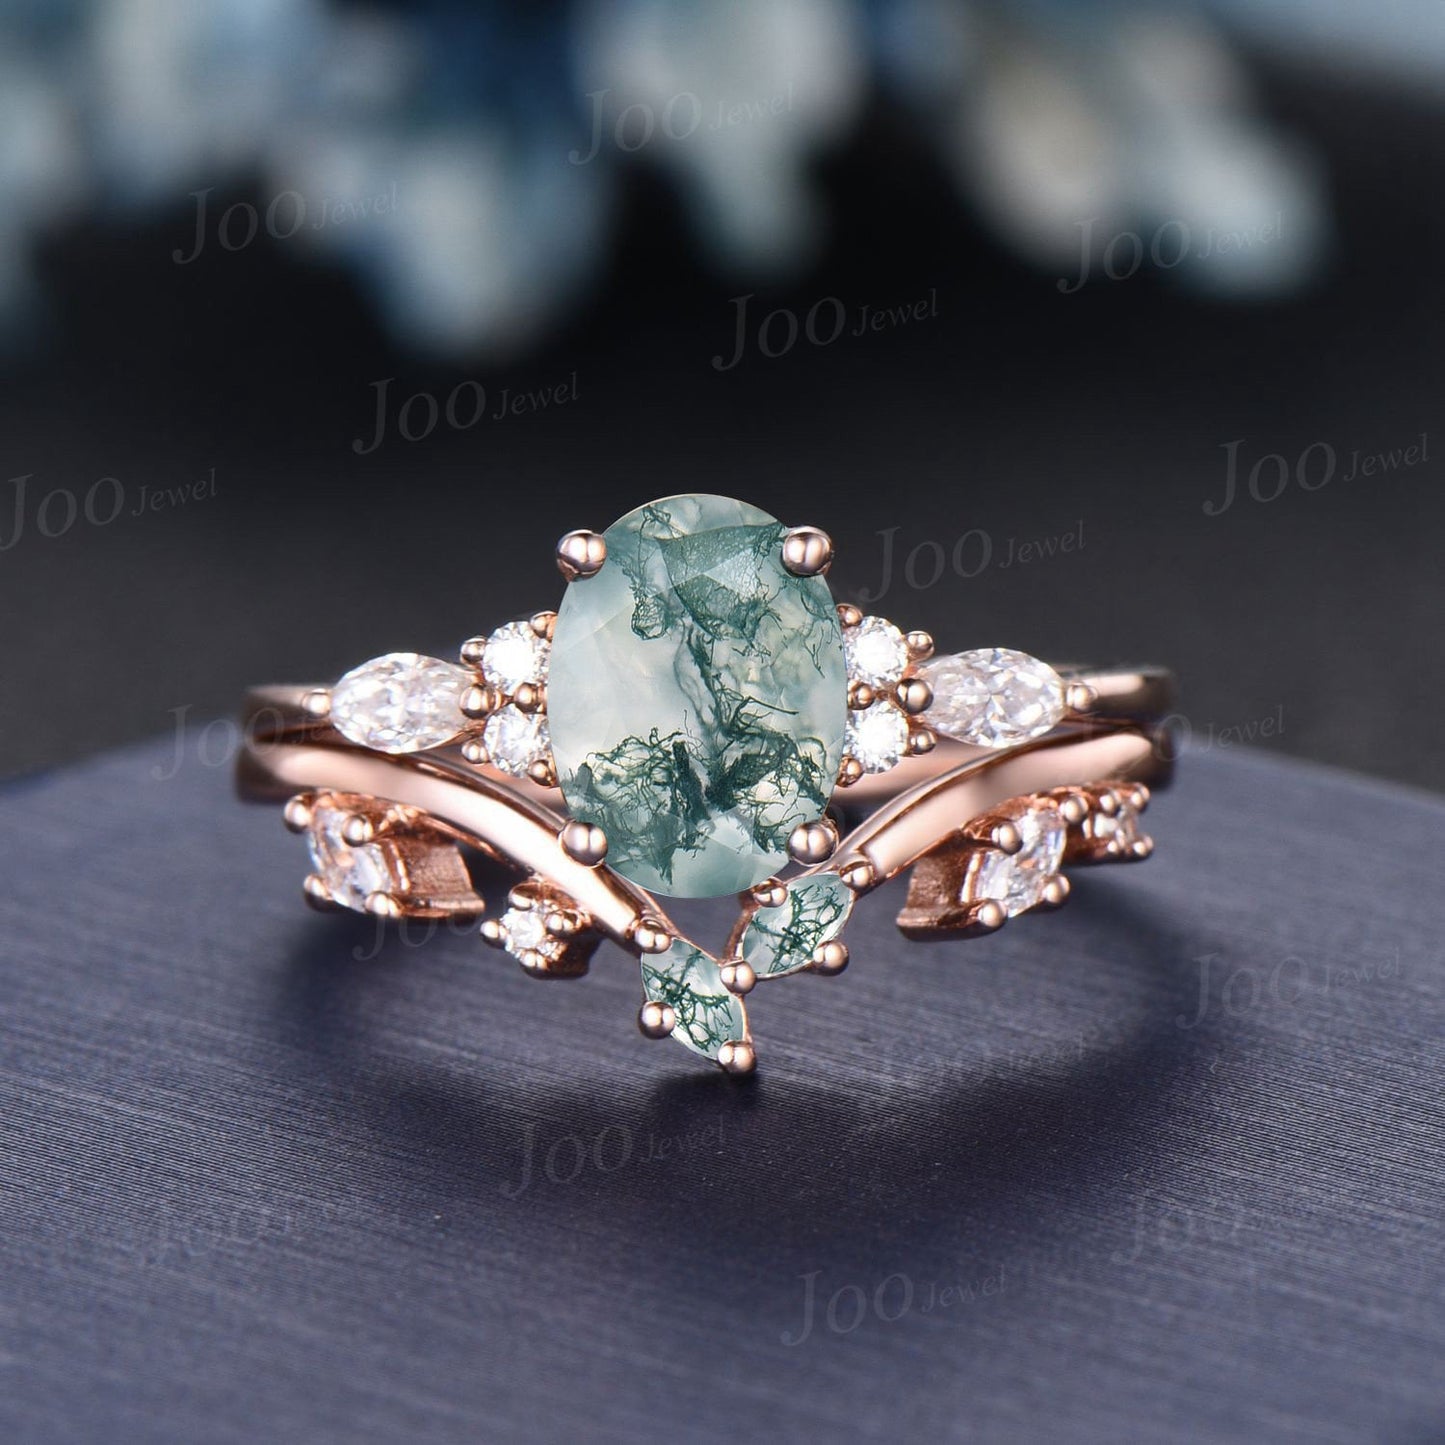 1.5ct Oval Natural Moss Agate Engagement Rings Set Rose Gold Cluster Aquatic Agate Bridal Ring Marquise Leaf Agate Moissanite Wedding Rings